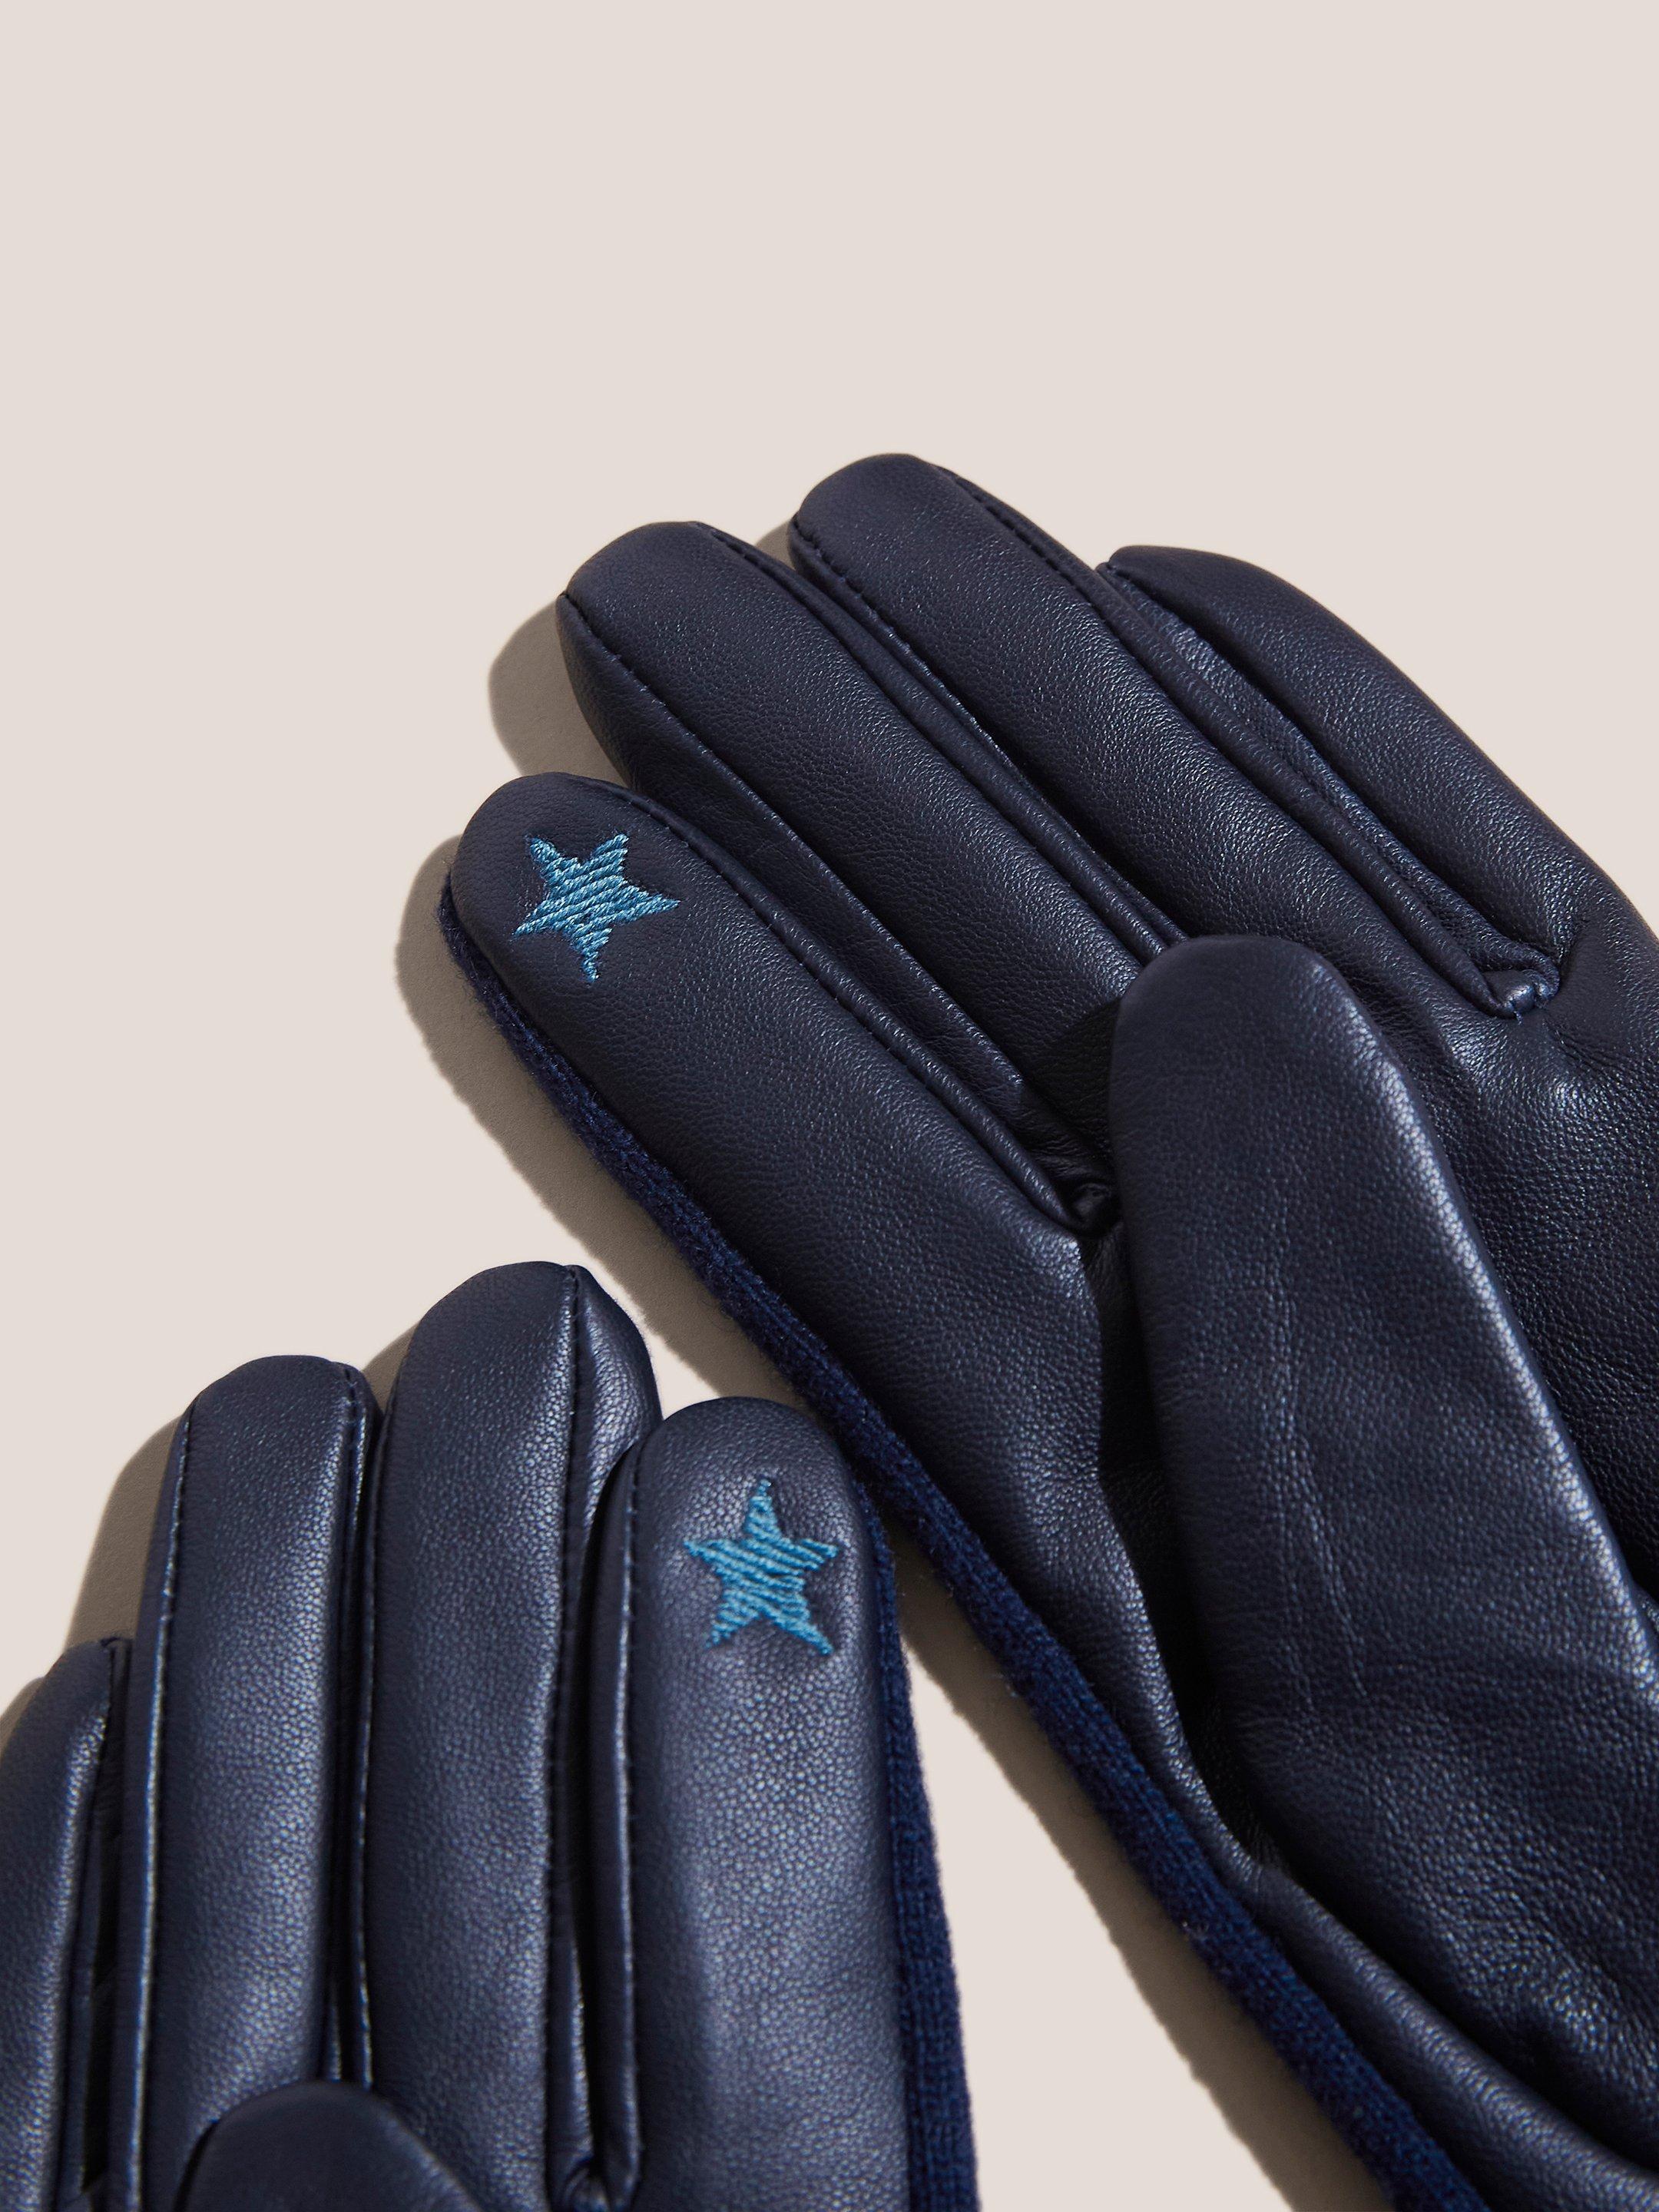 Lucie Wool Leather Mix Glove